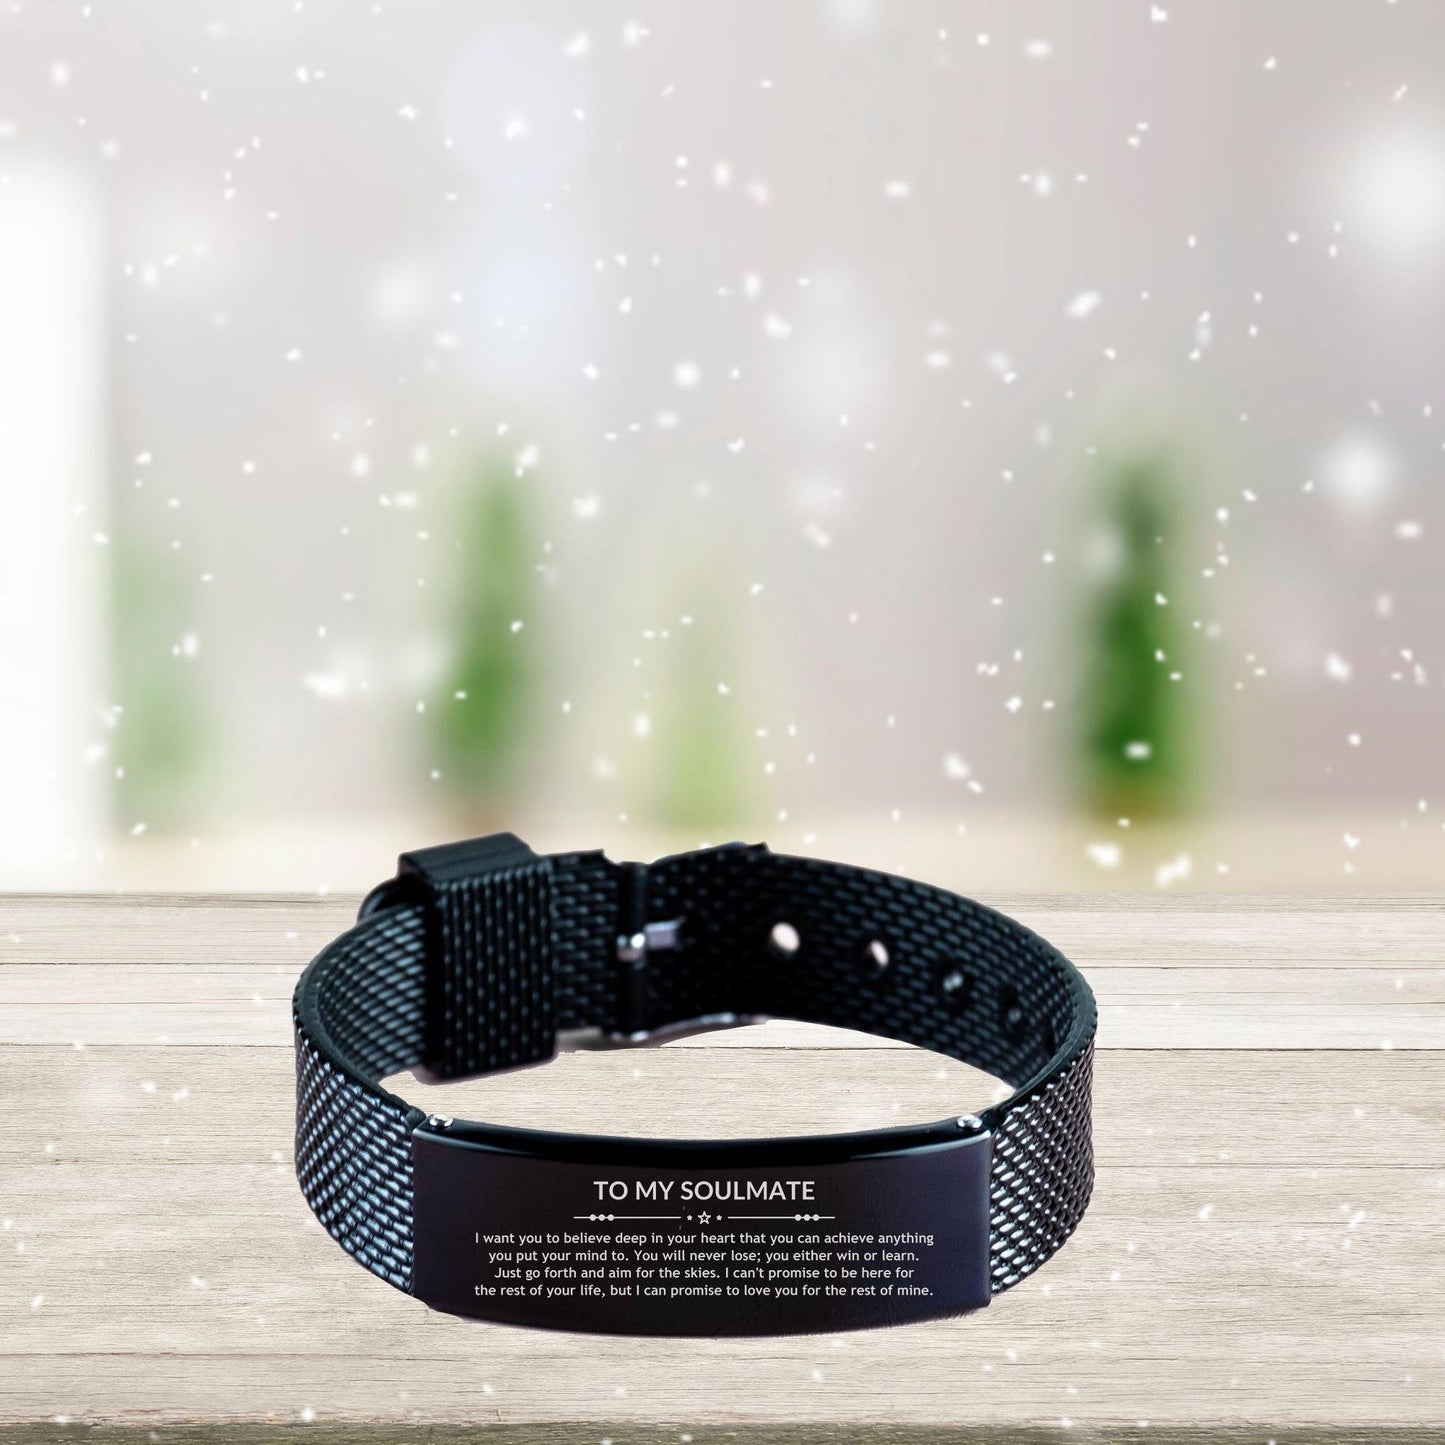 Inspirational Soulmate Engraved Black Shark Mesh Bracelet - Behind you, all your Memories, Before you, all your Dreams - Birthday, Christmas Holiday Gifts - Mallard Moon Gift Shop